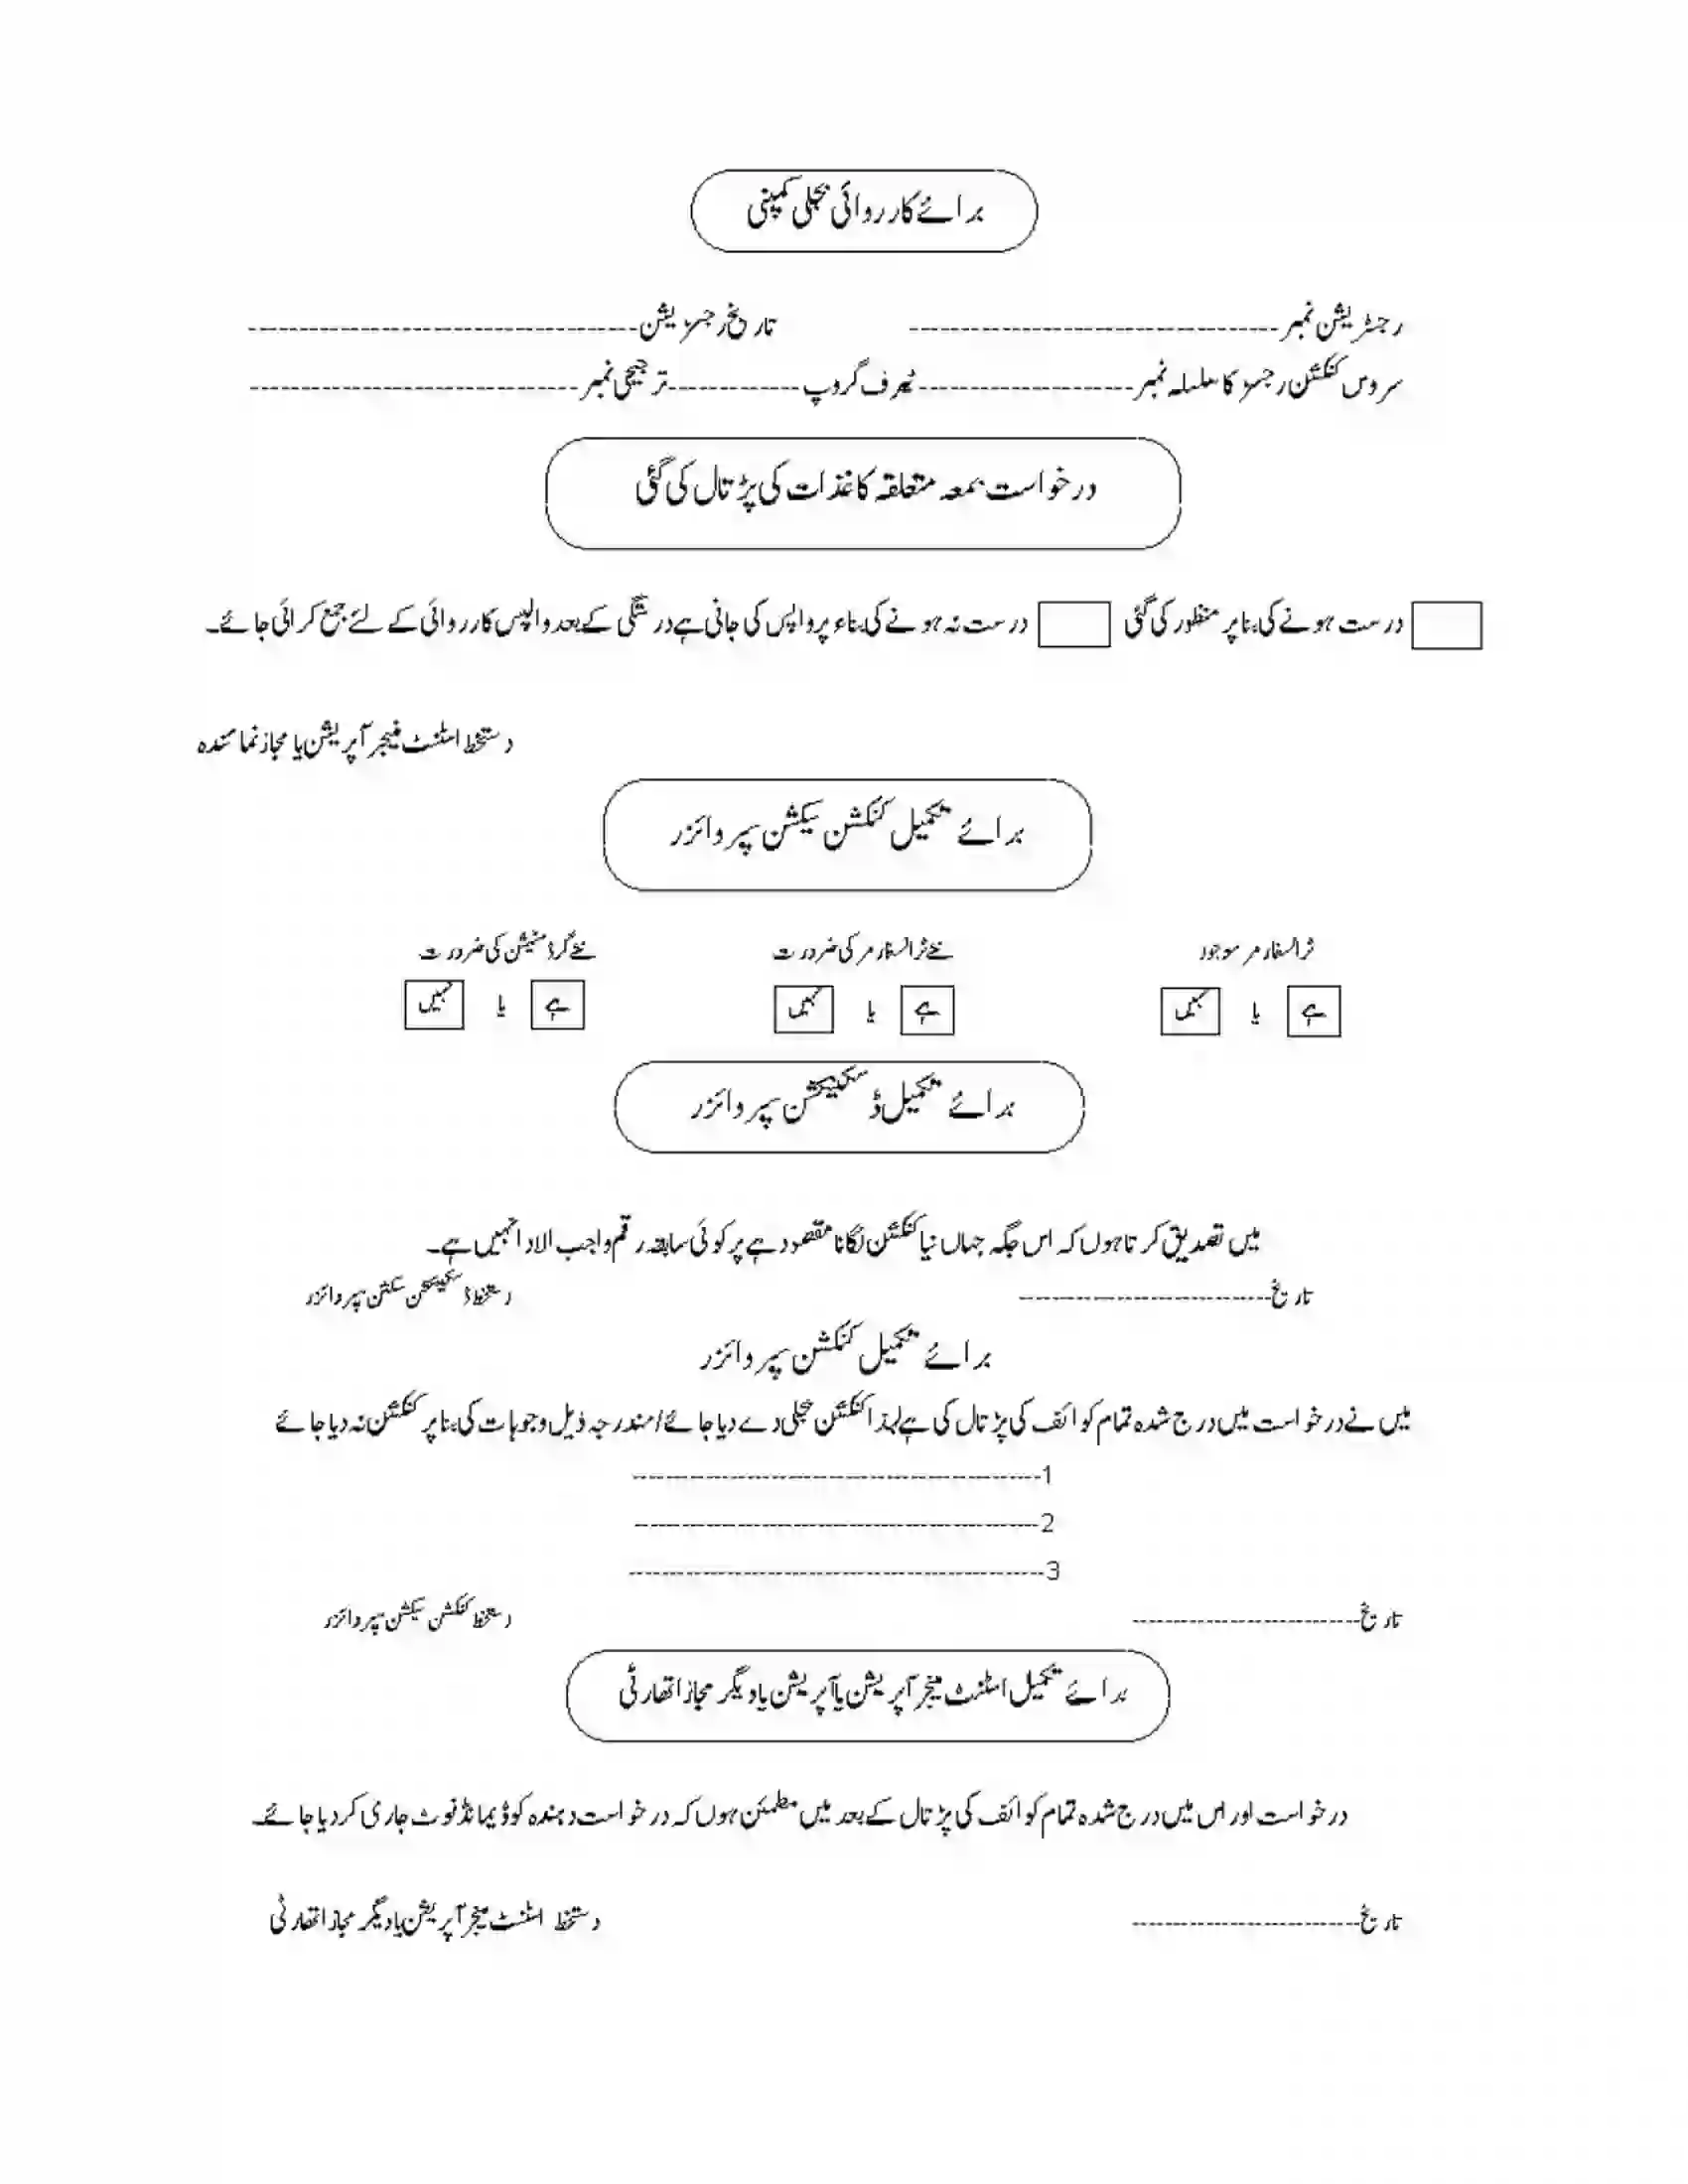 MEPCO New Connection Form Updated 2022 Download mepco.com.pk-2